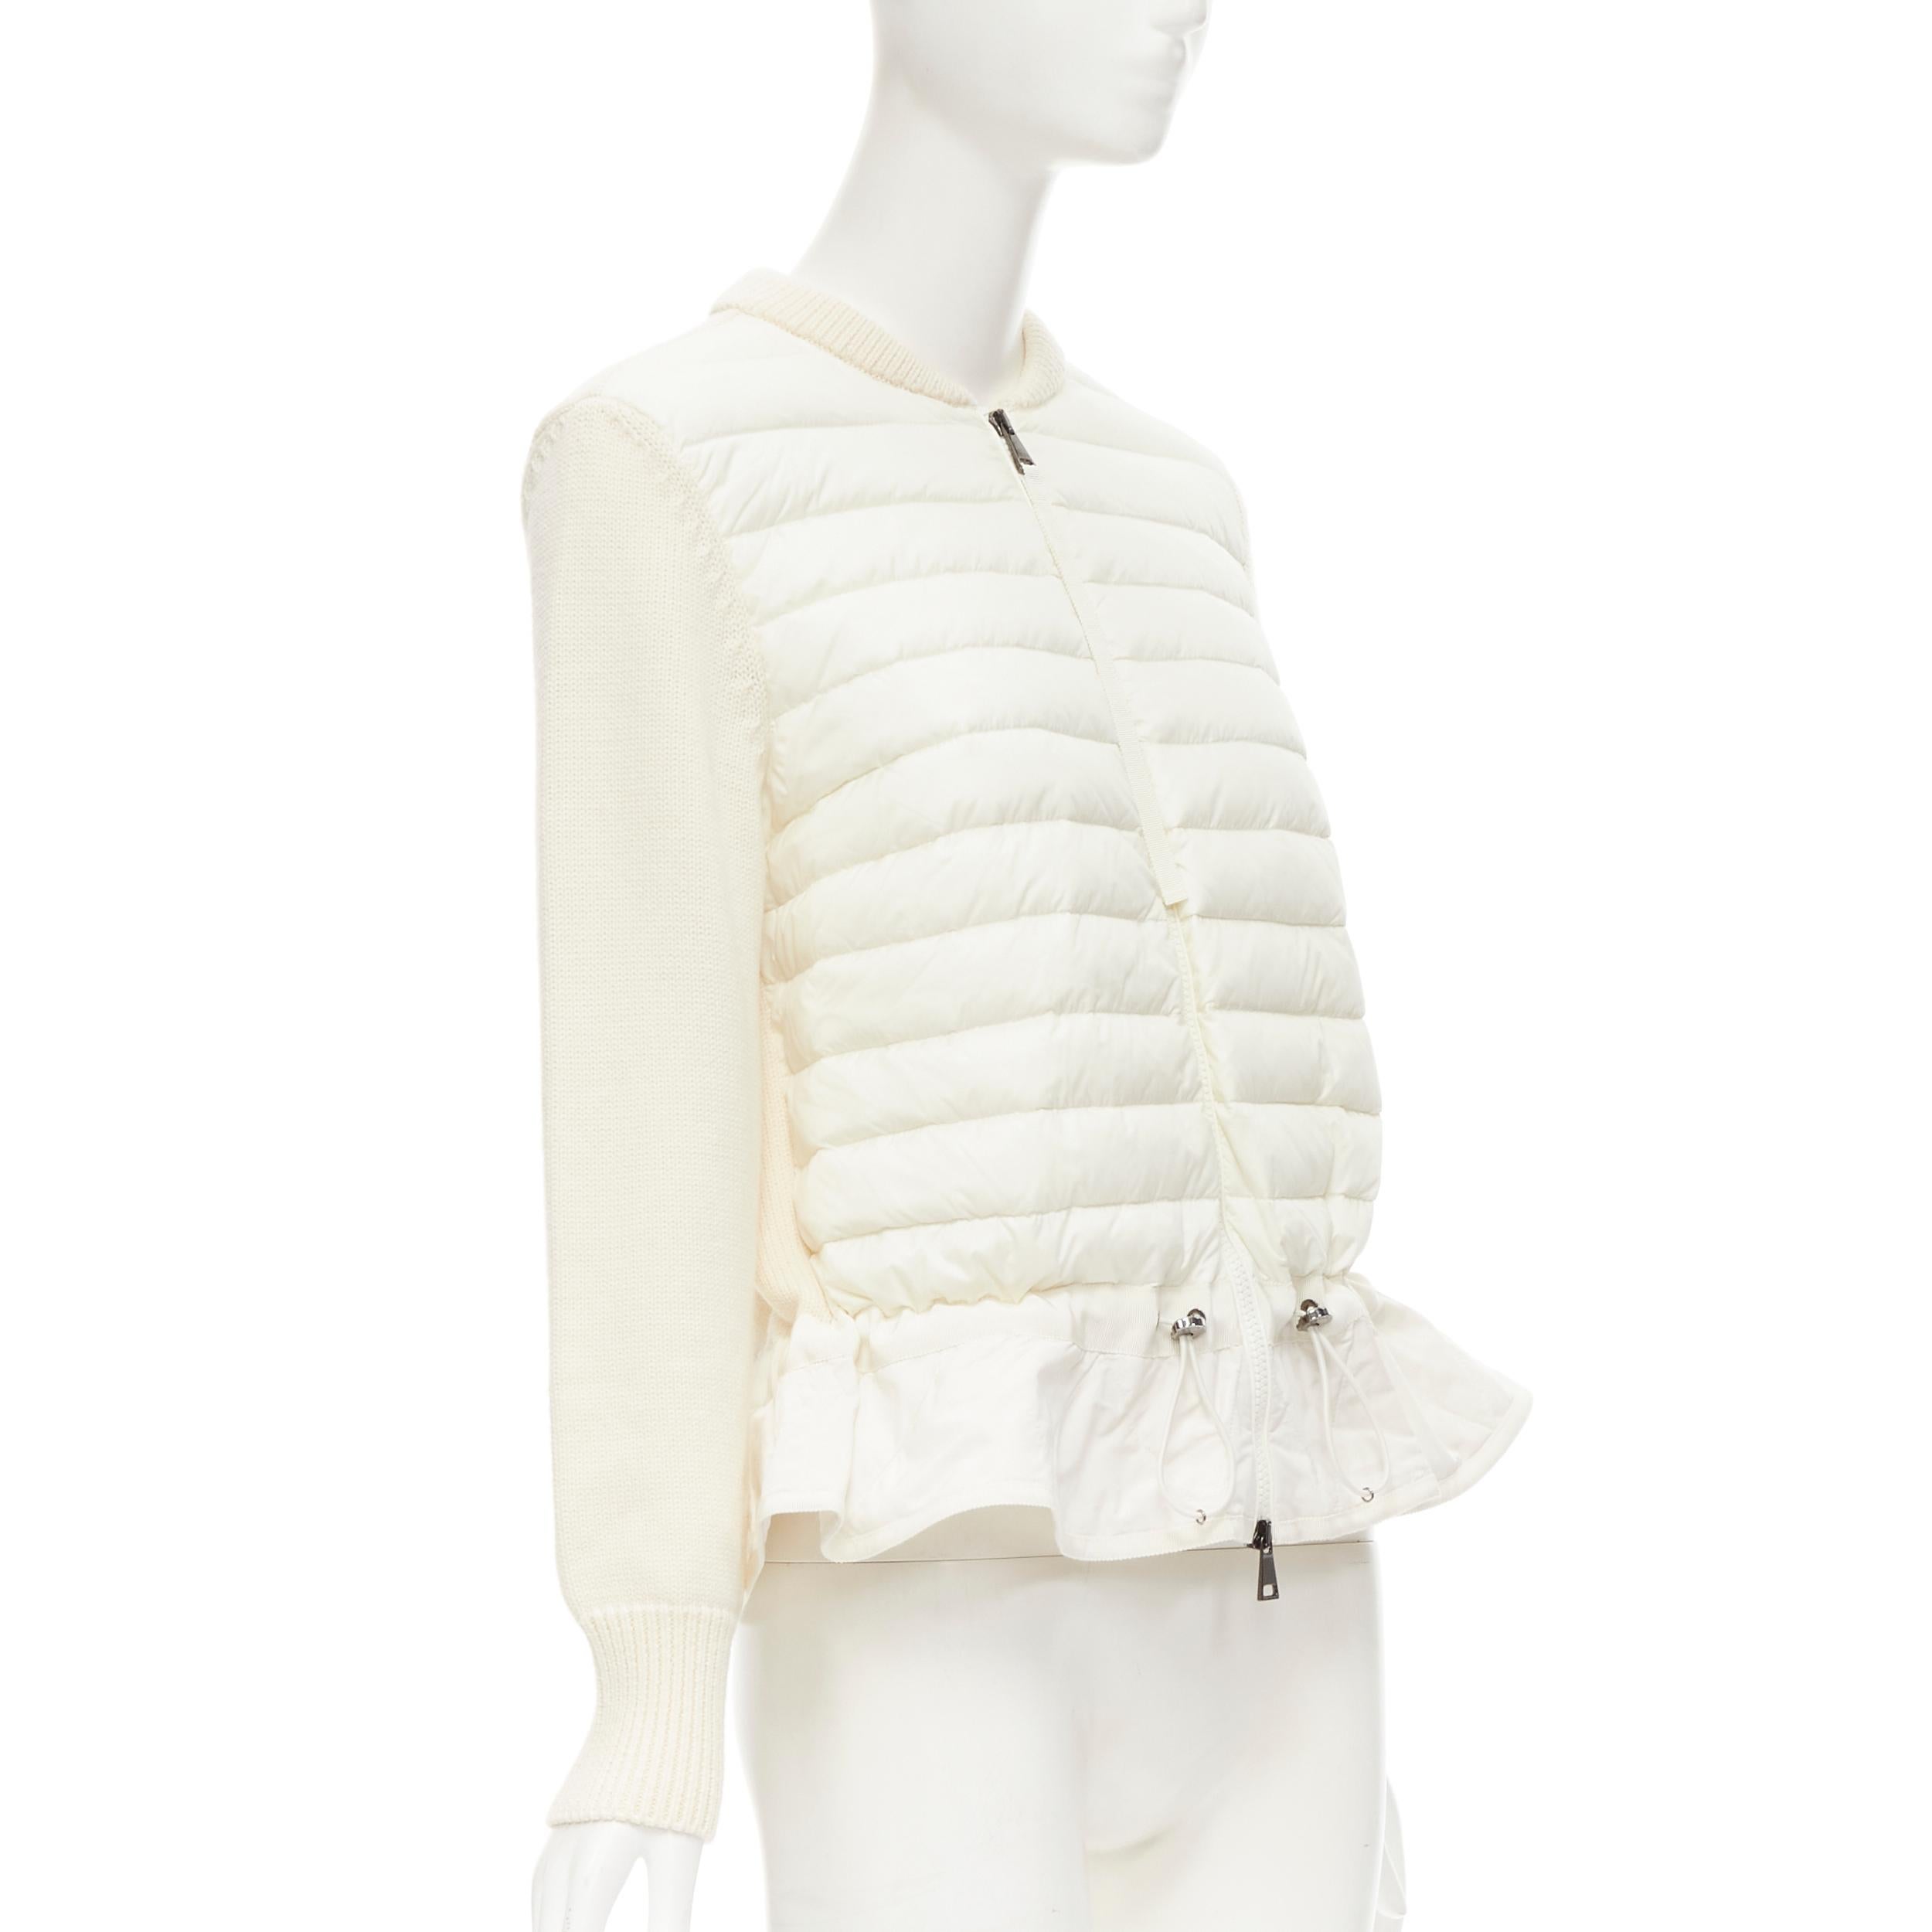 MONCLER Maglione Tricot cream down padded peplum wool cardigan L 
Reference: JYLM/A00017 
Brand: Moncler 
Material: Wool 
Color: Cream 
Pattern: Solid 
Closure: Zip 
Extra Detail: Dual zip front. Signature Moncler emblem on left sleeve. Nylon down